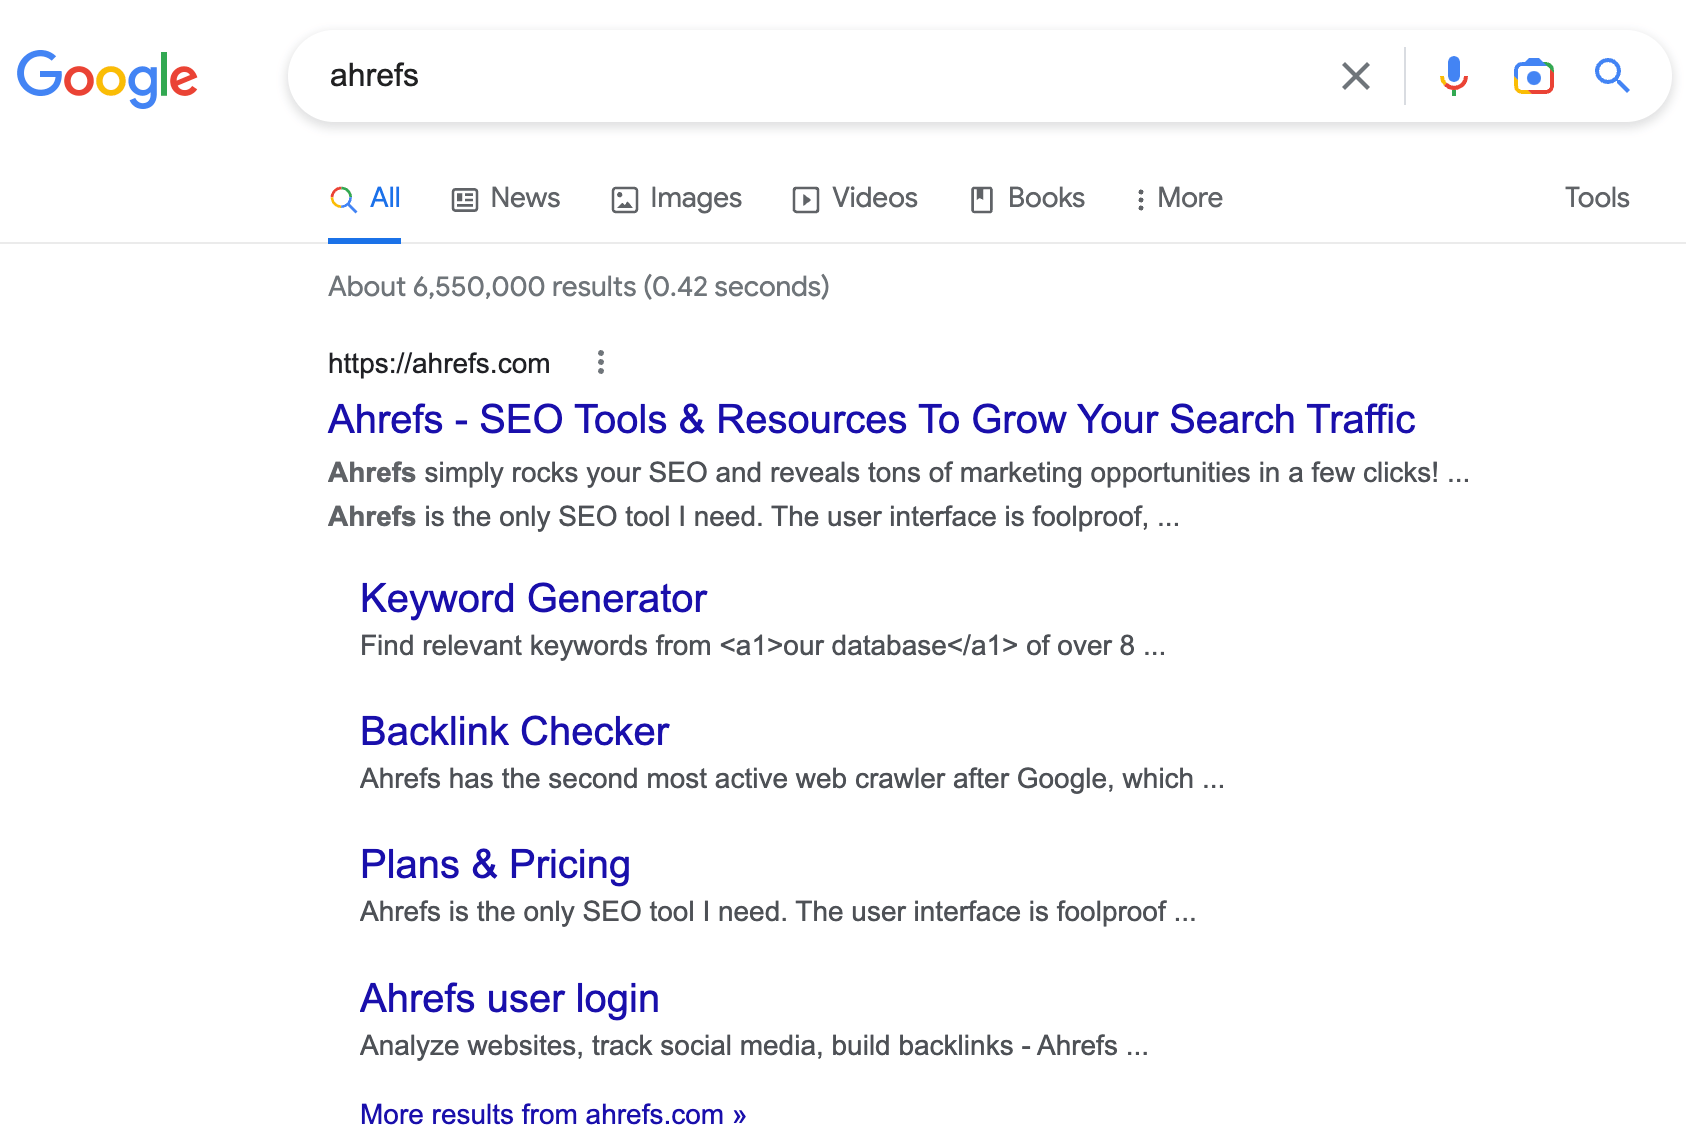 Google search results by keyword "ahrefs"